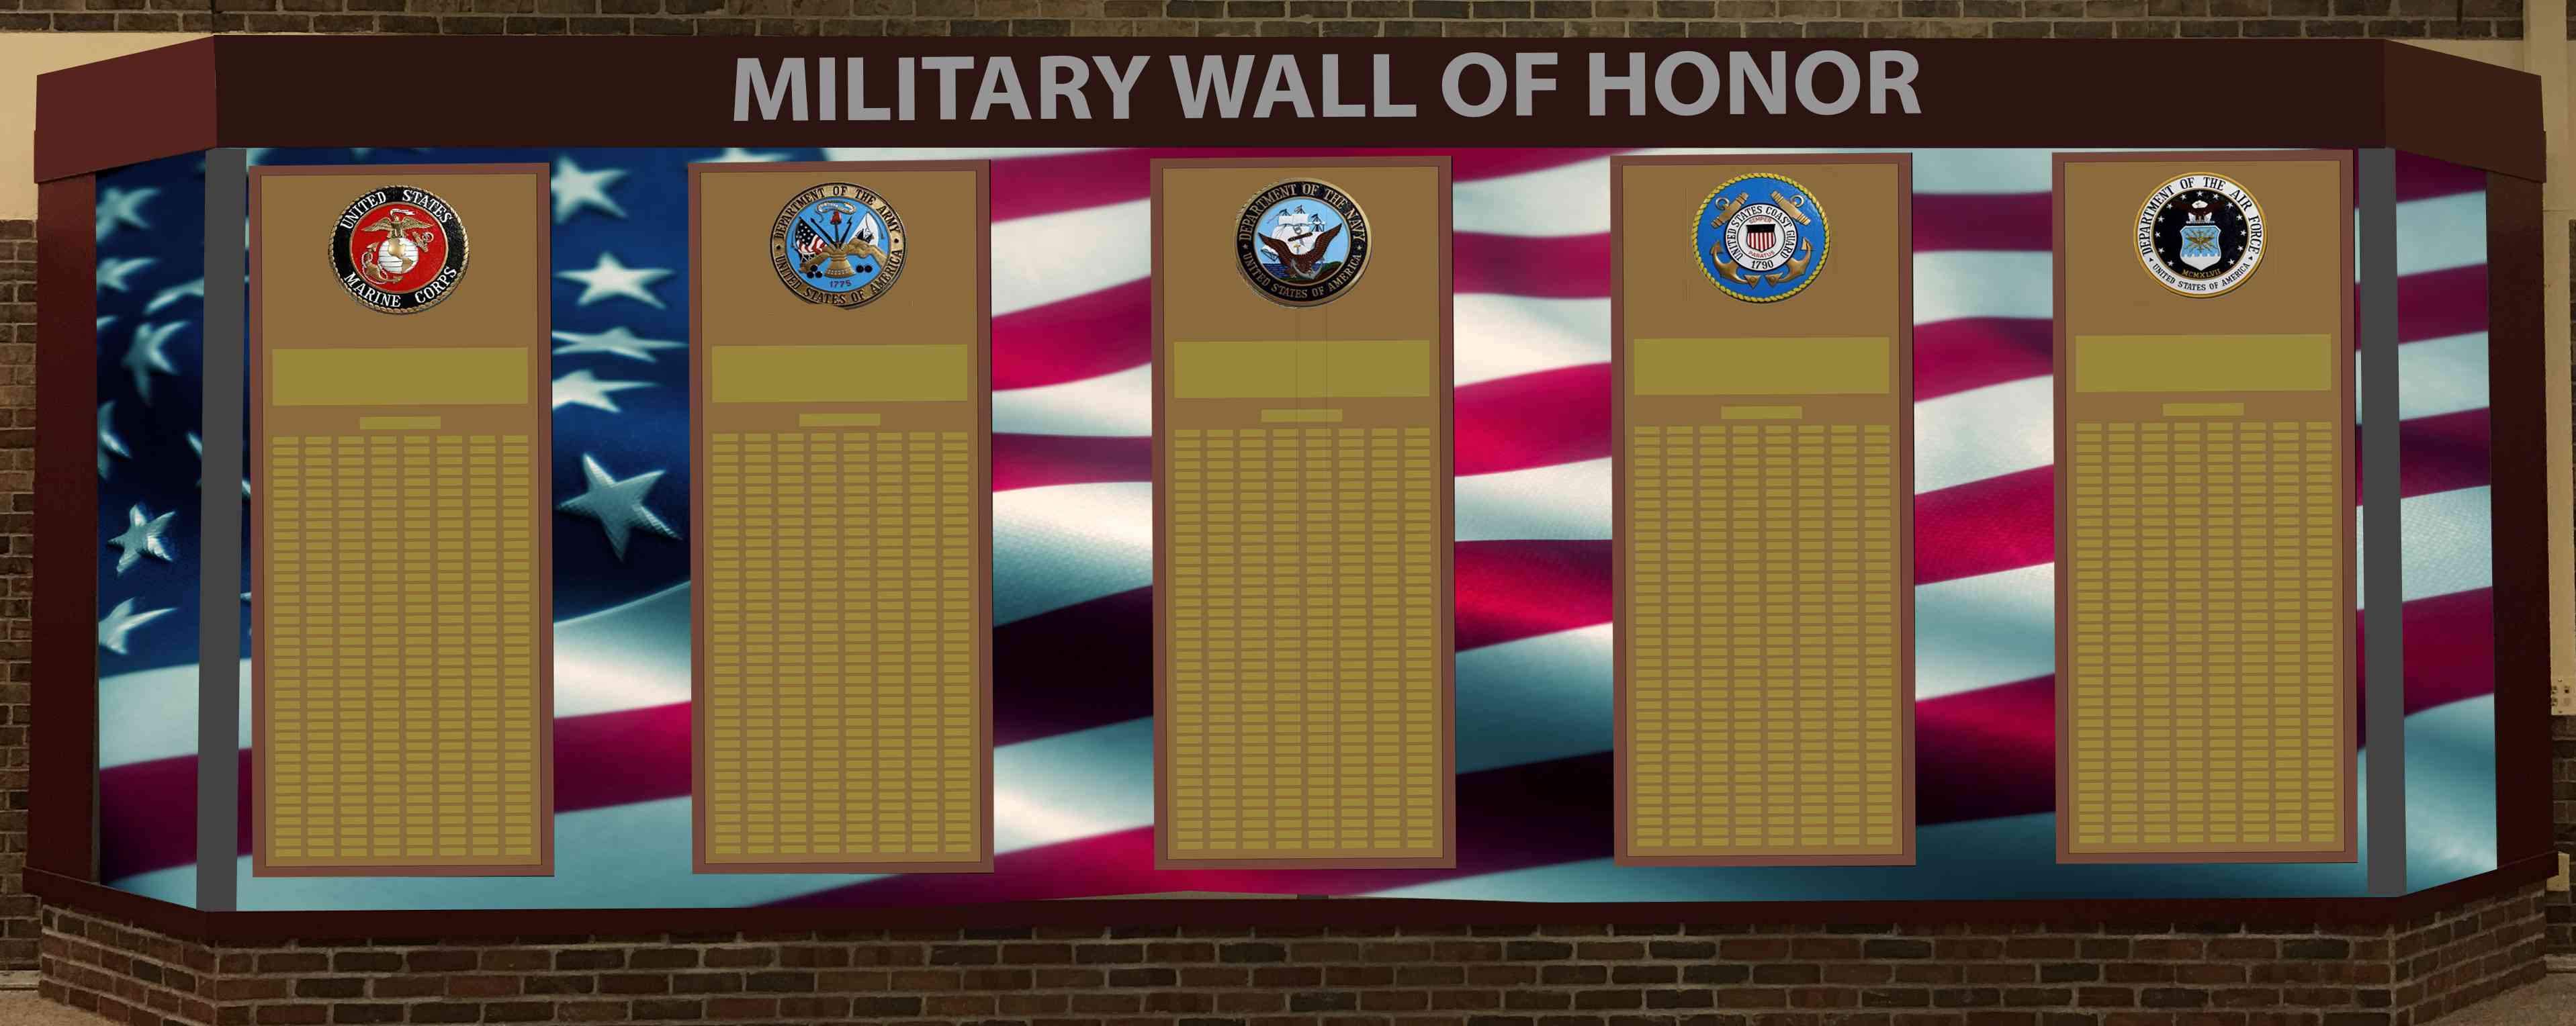 Military Wall of Honor Image